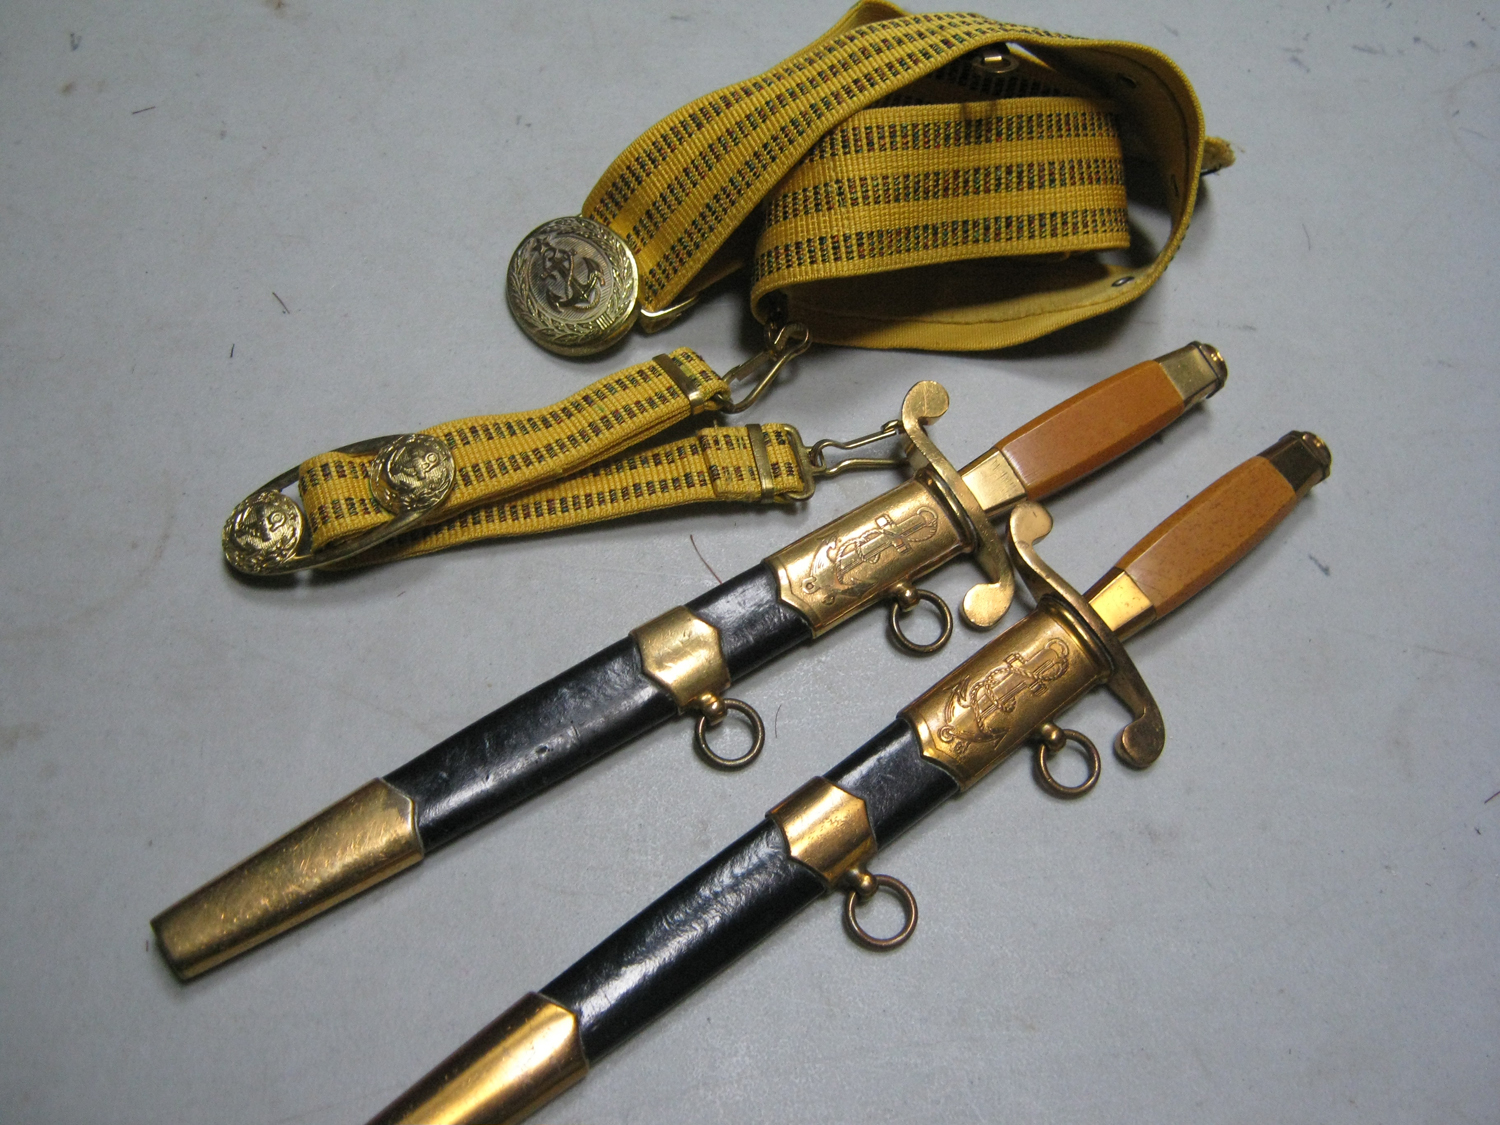 Two Soviet Russian naval daggers, the blades dated "1952" and "58", in their sheaths with brocade